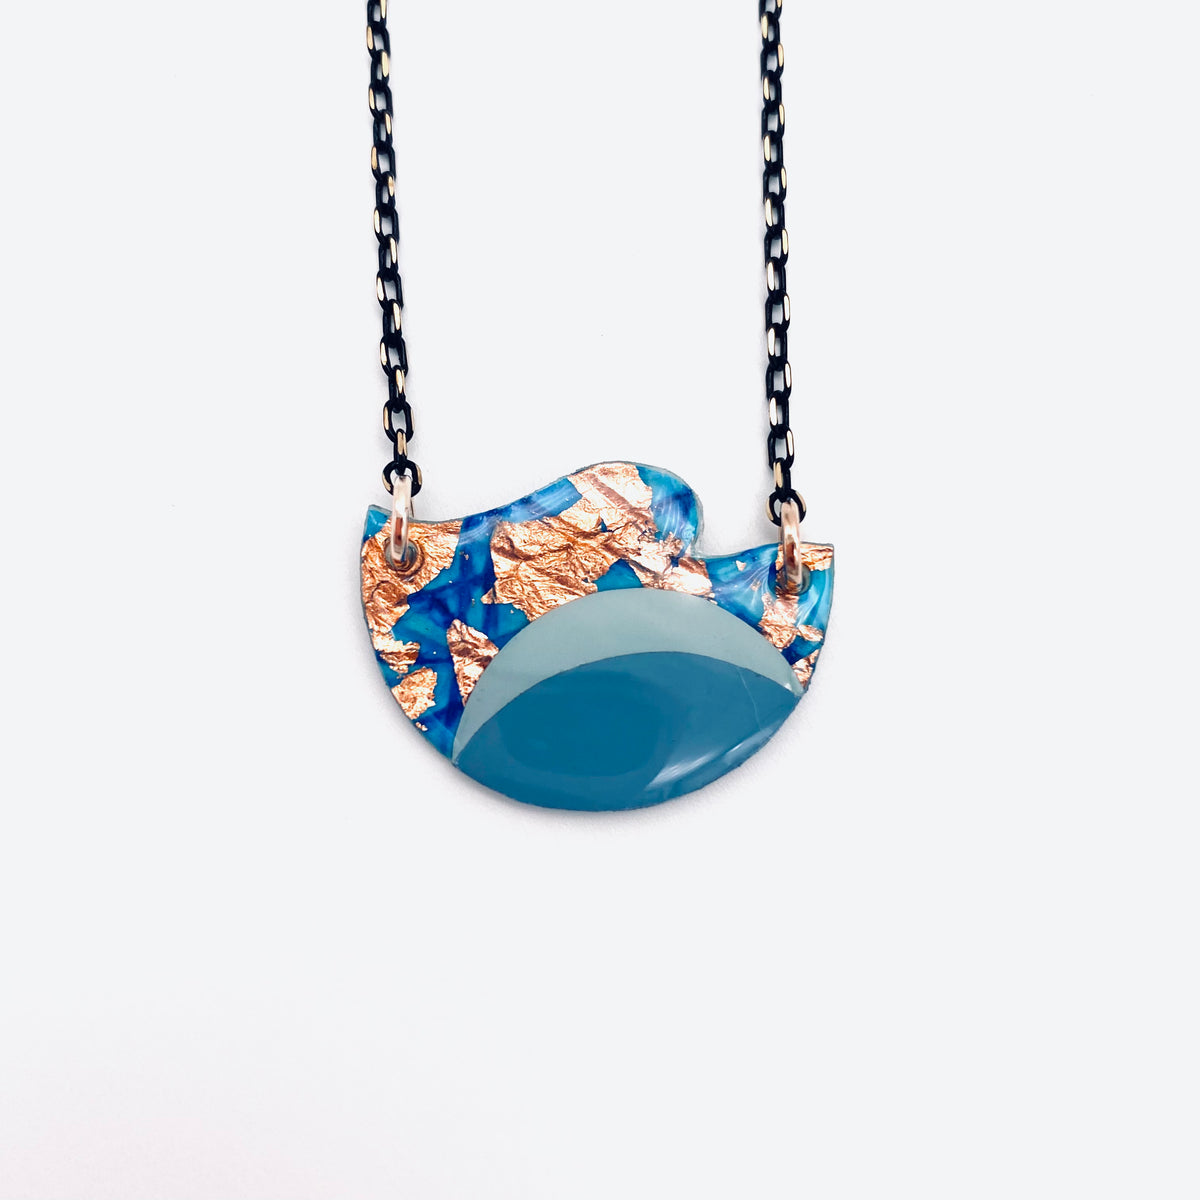 Tonn sgraffito necklace in turquiose/blues/rose-gold